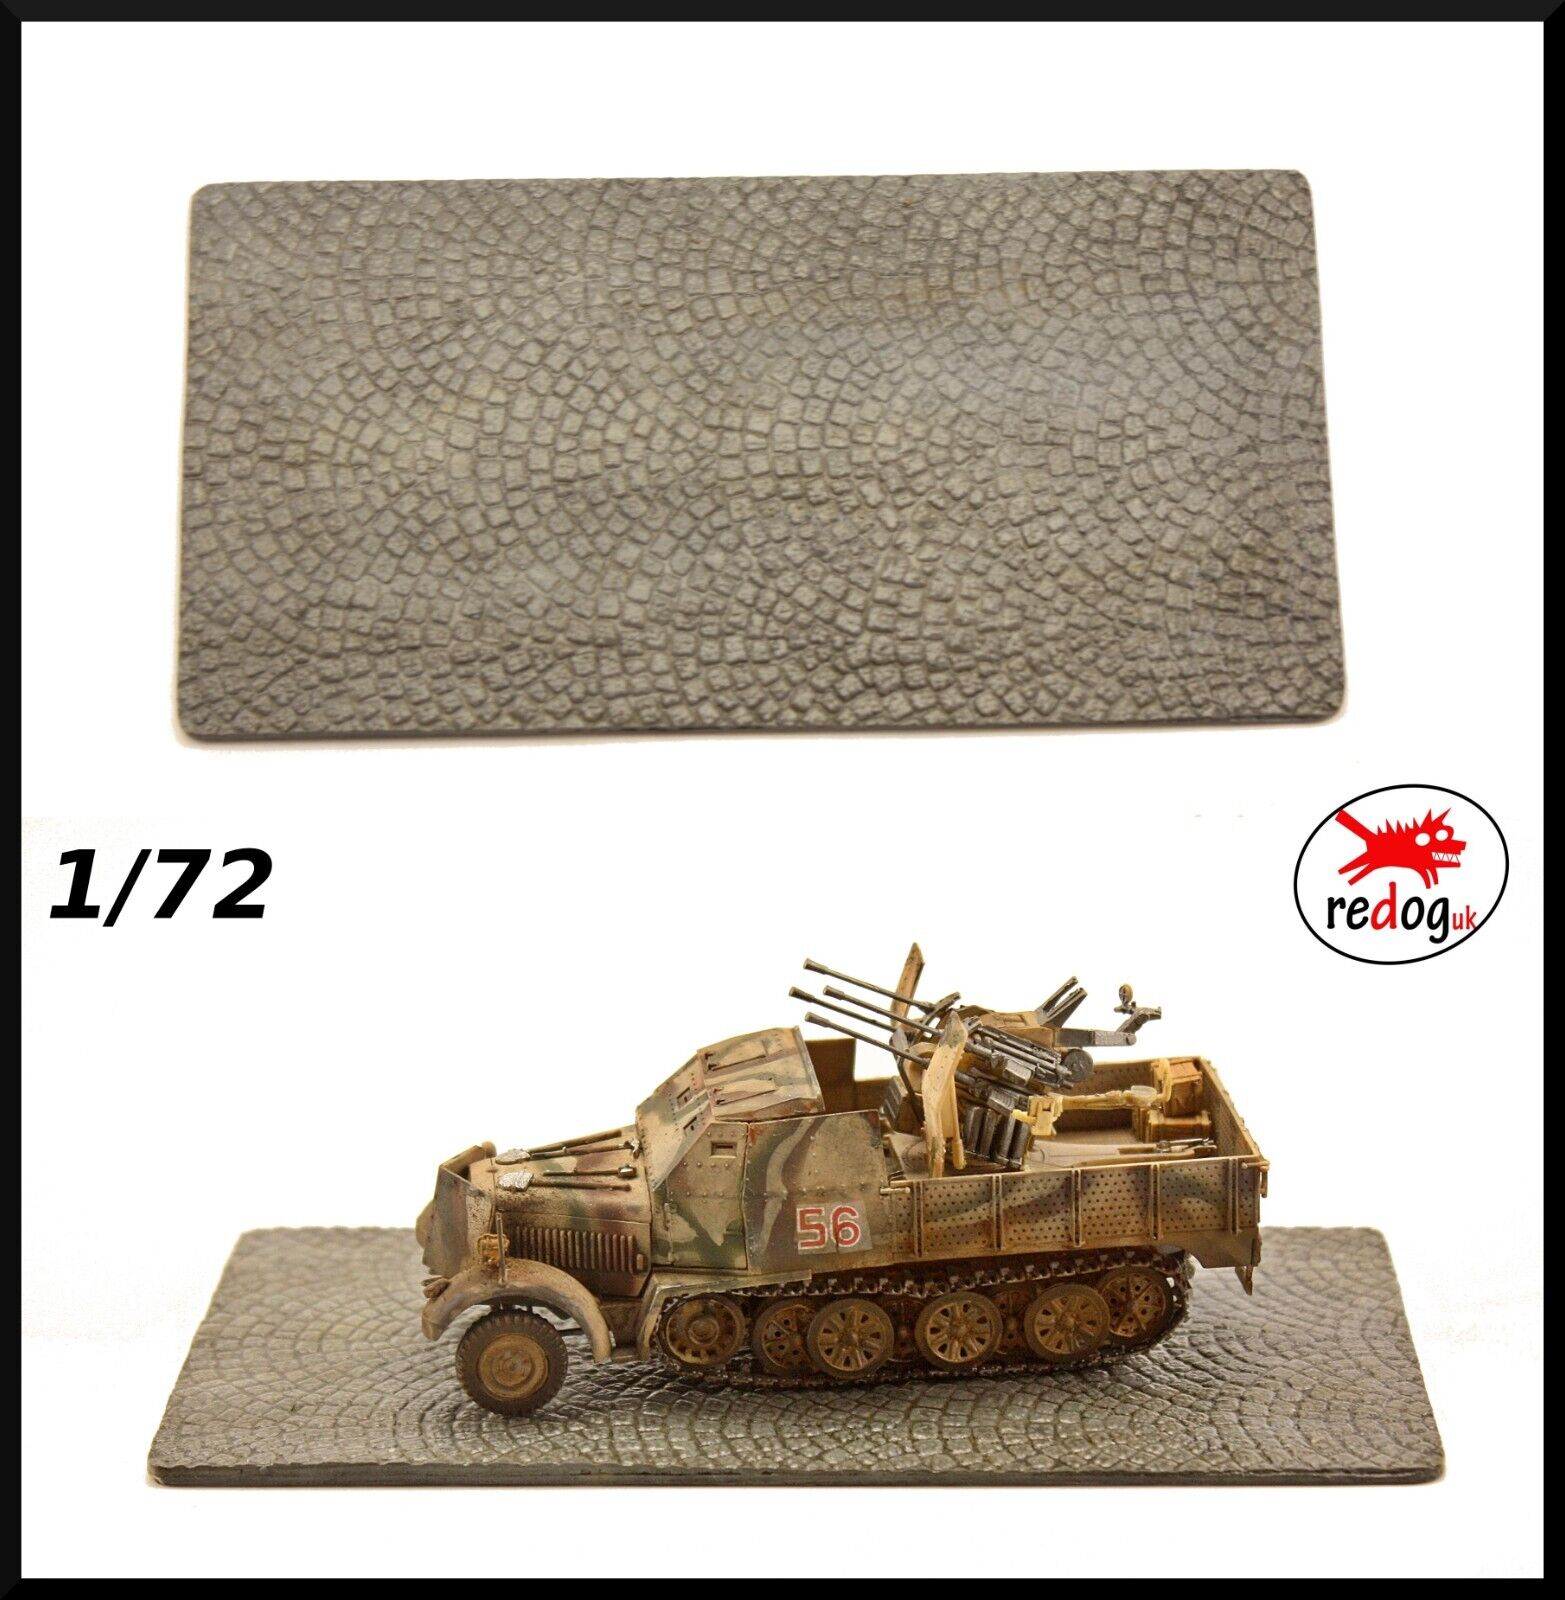 1:72  Paved Road Diorama Resin Base for Military Scale Model Vehicles D2 - redoguk